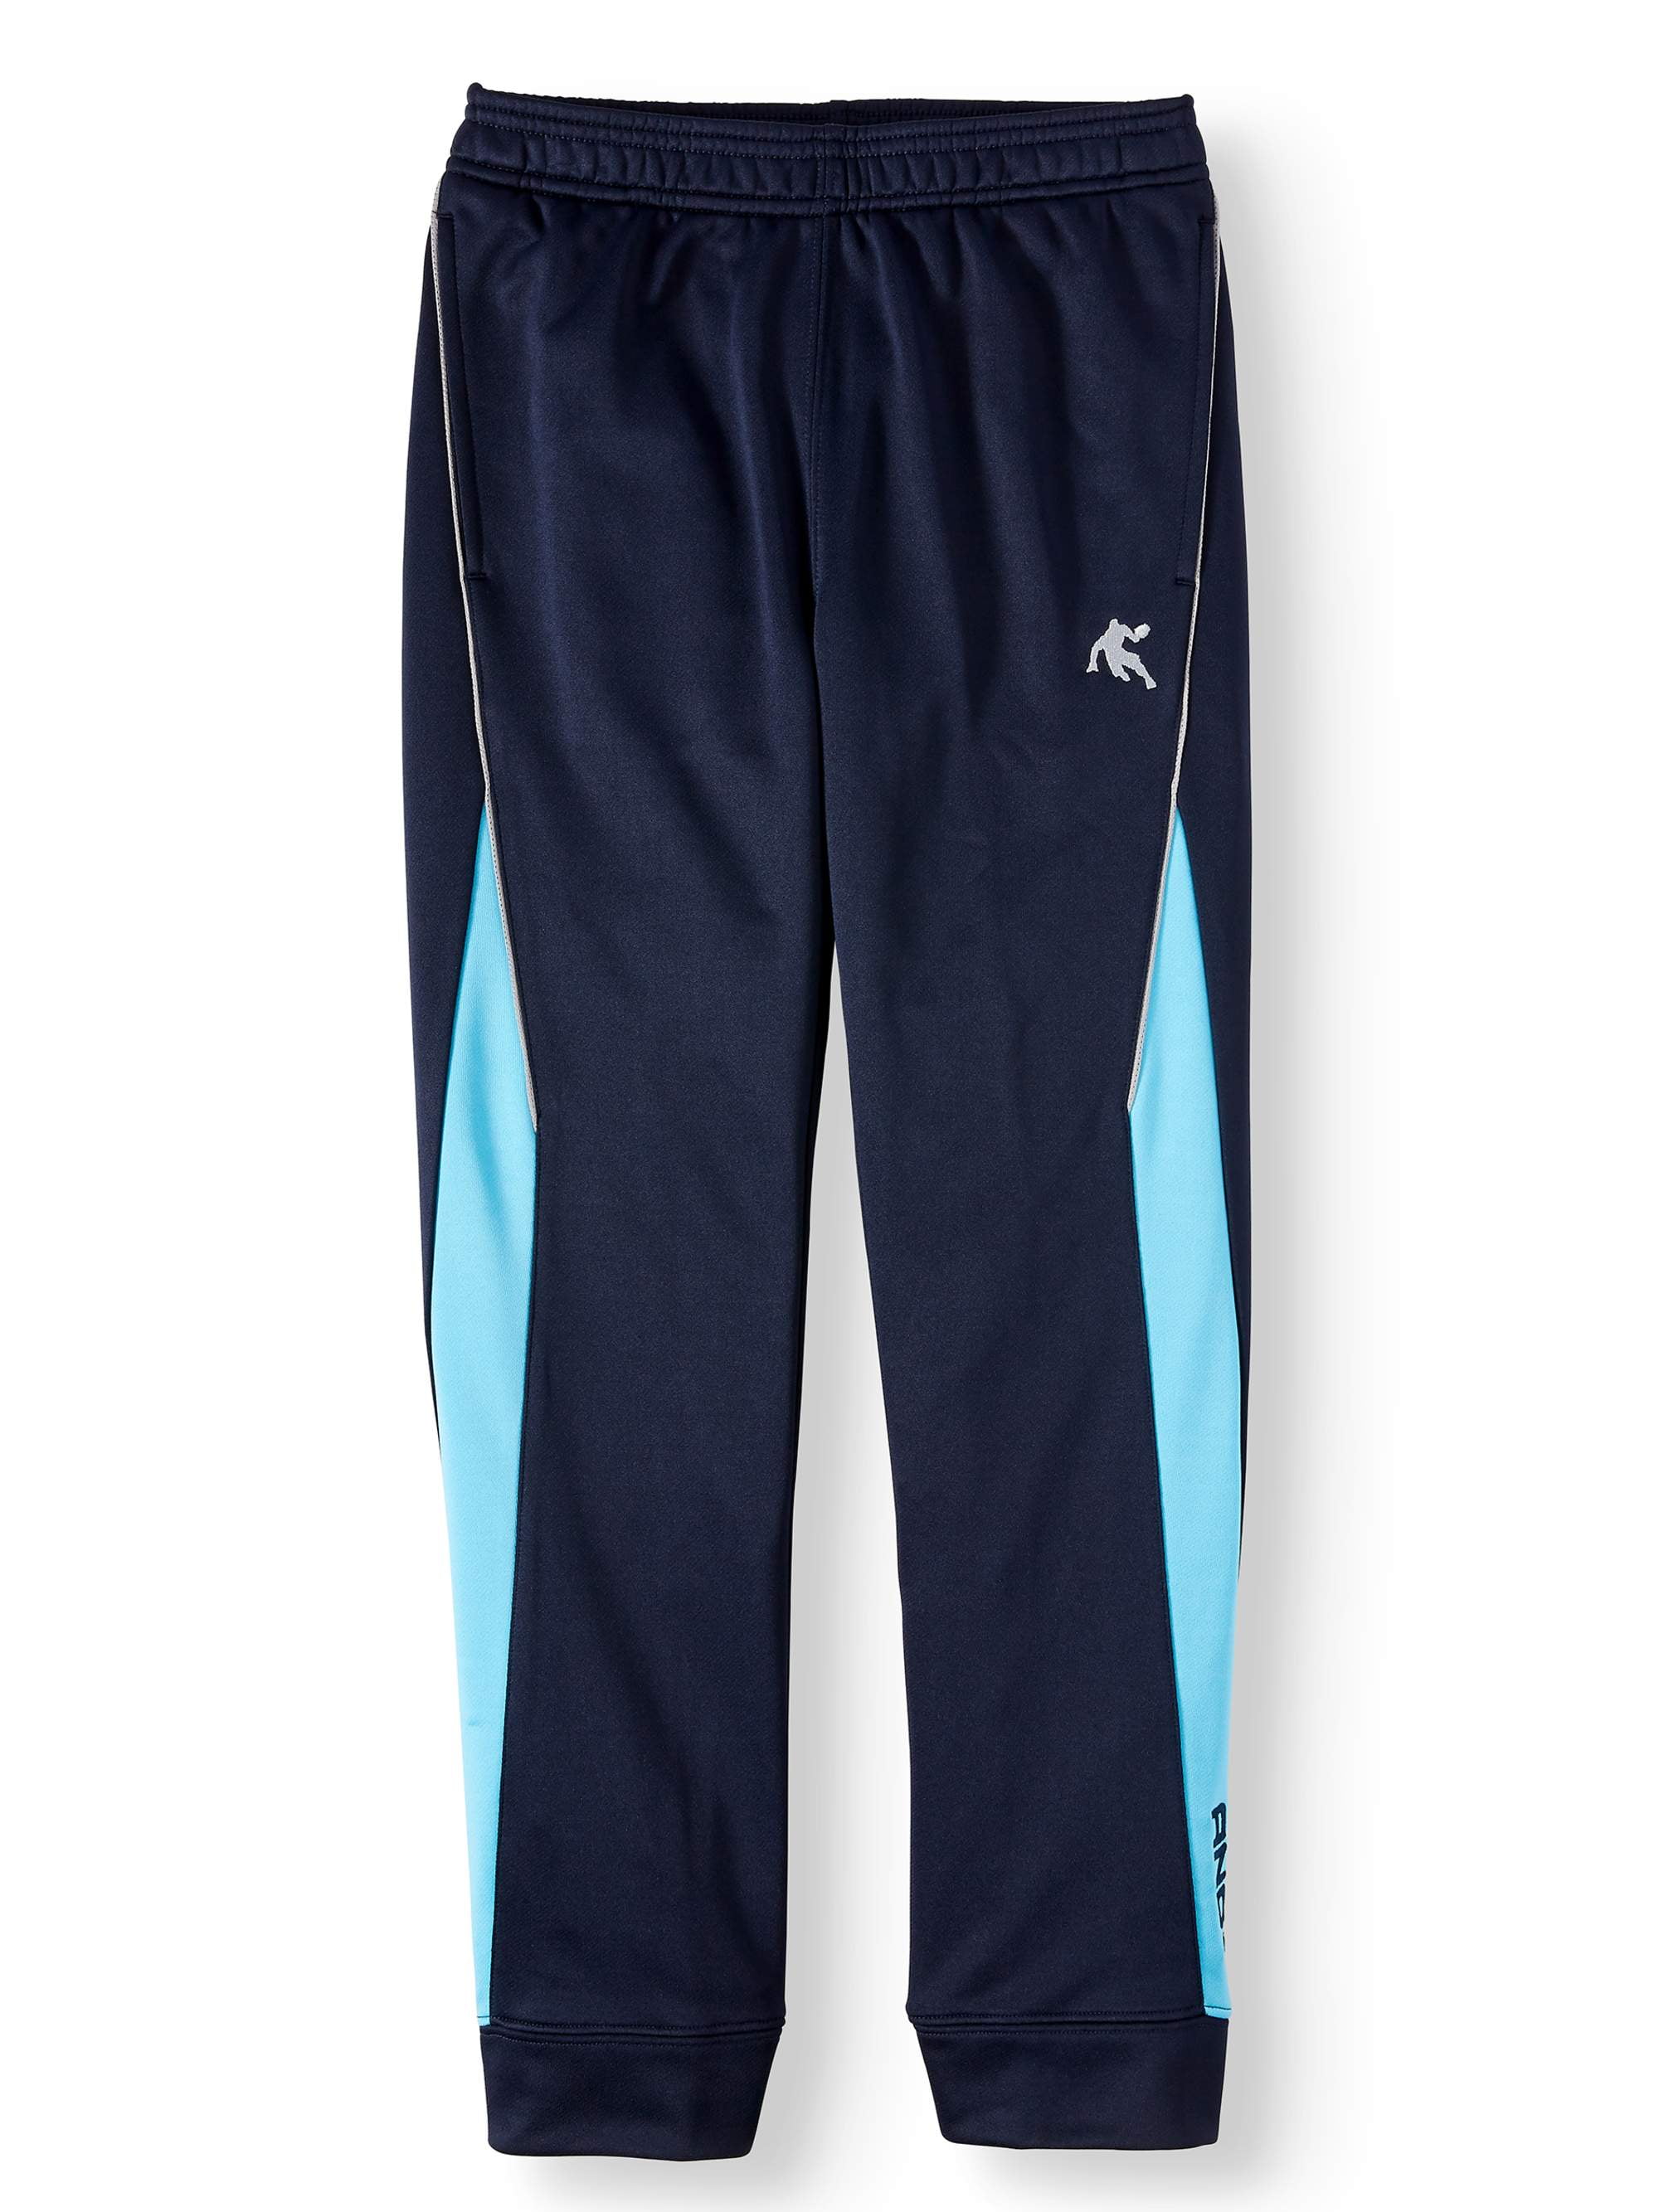 AND1 - AND1 Front Runner Jogger Basketball Pants (Little Boys & Big ...